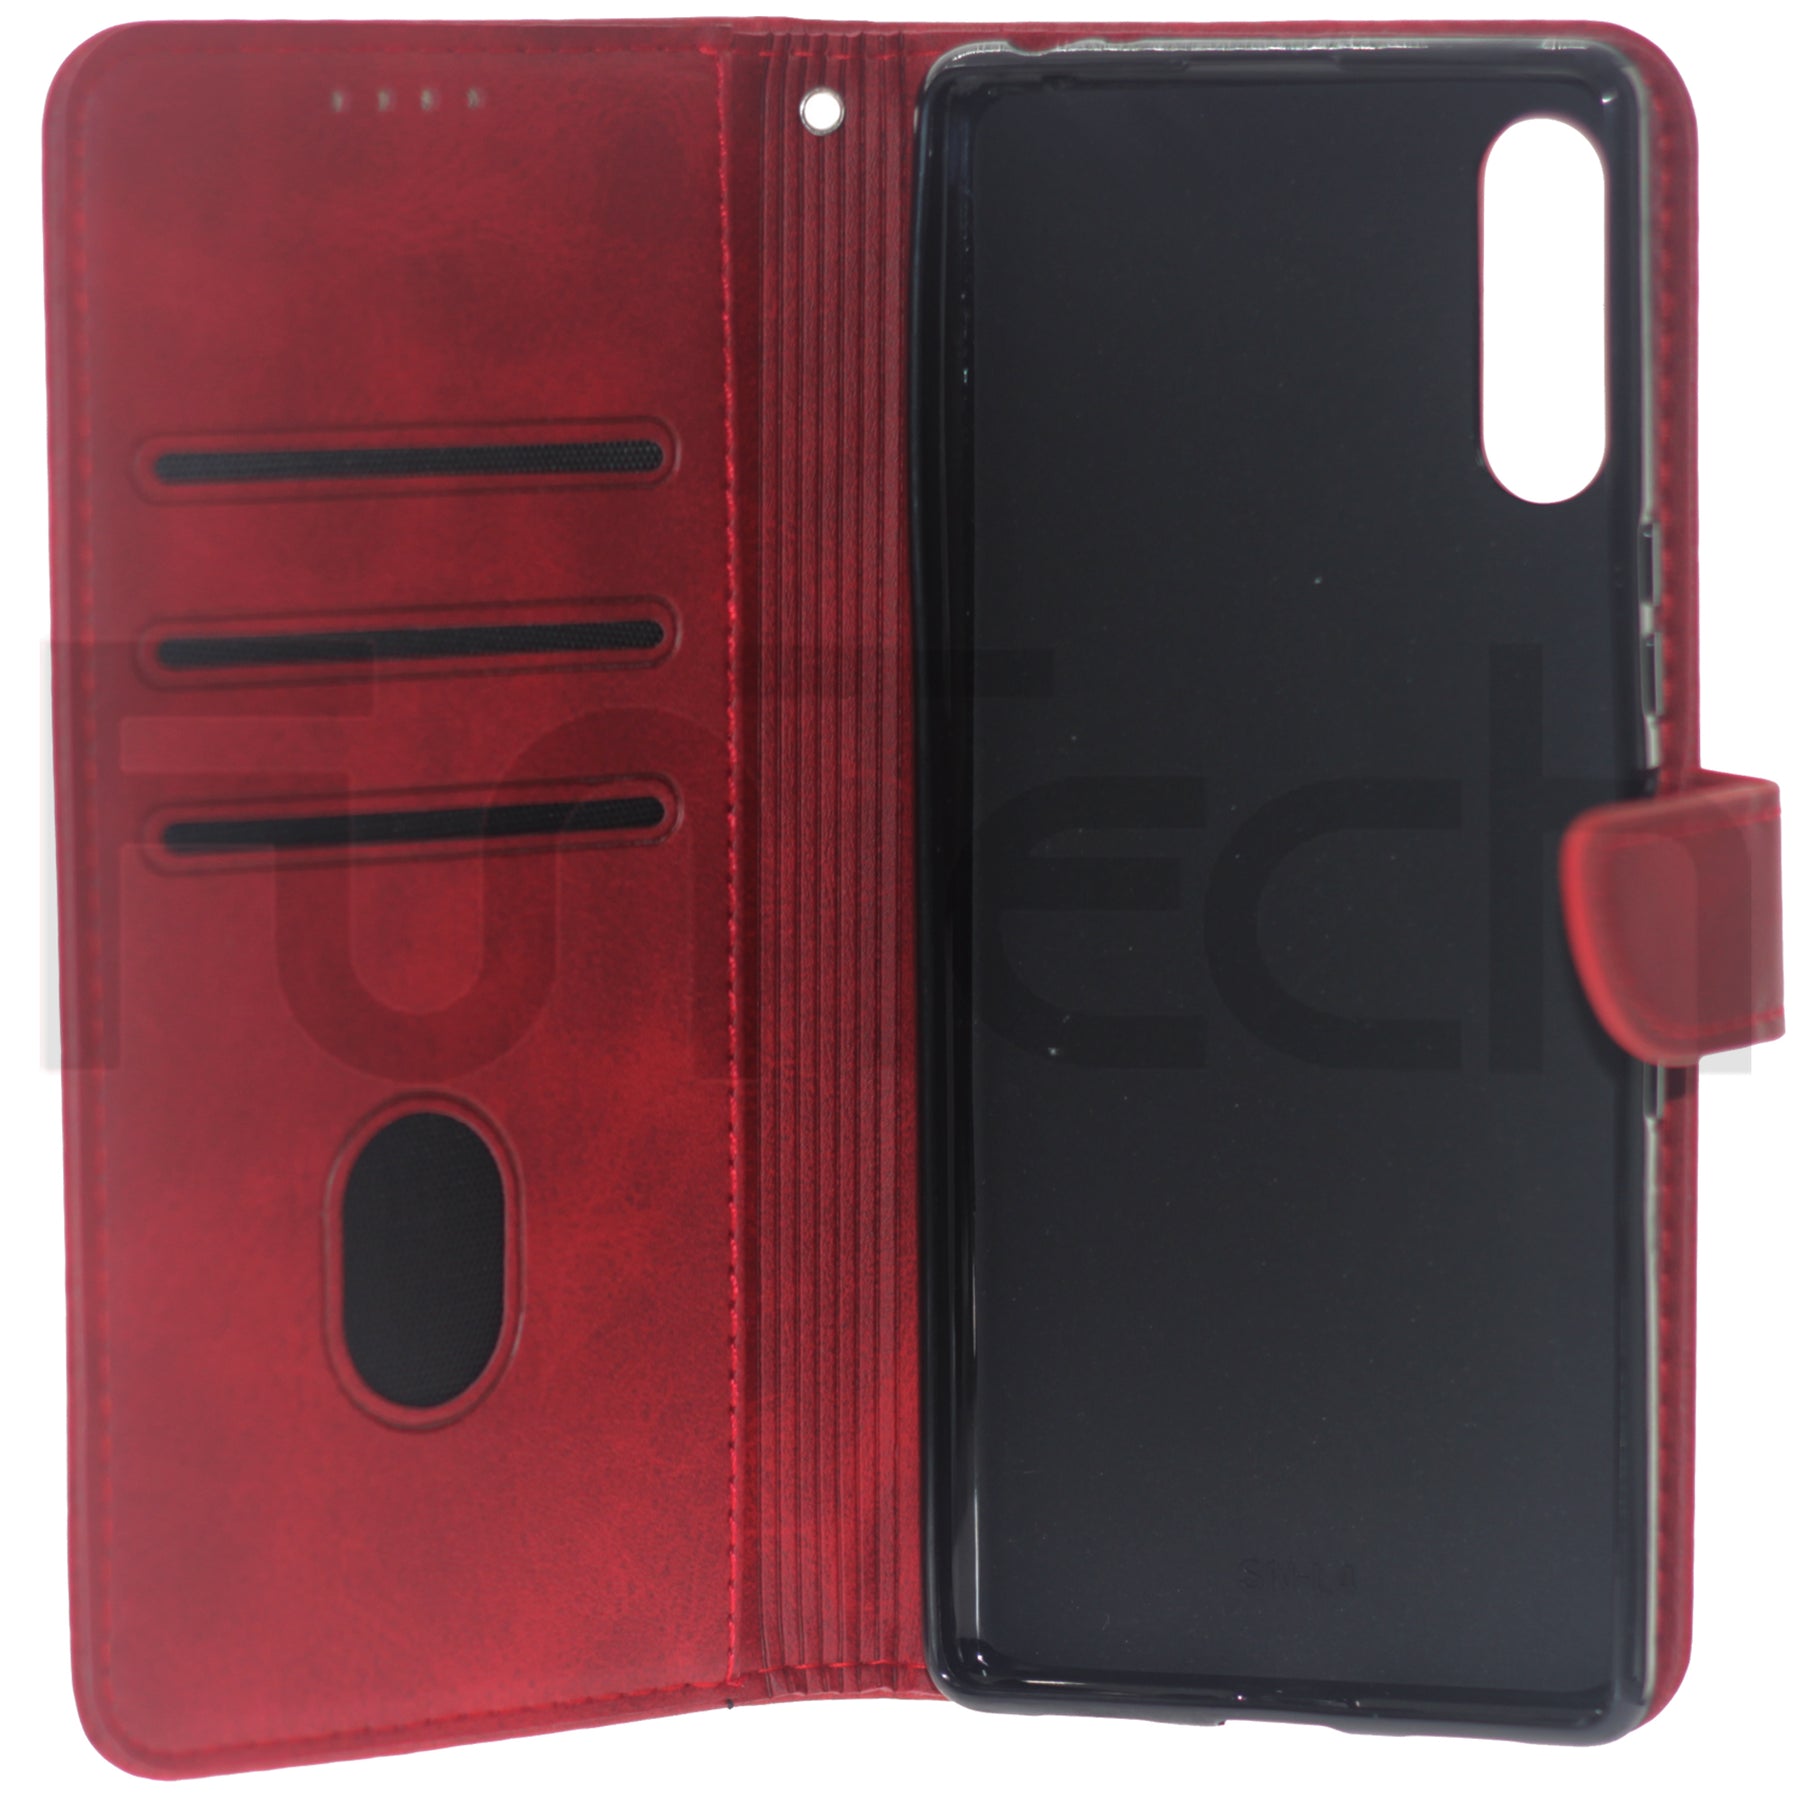 Sony Case, Color Red.